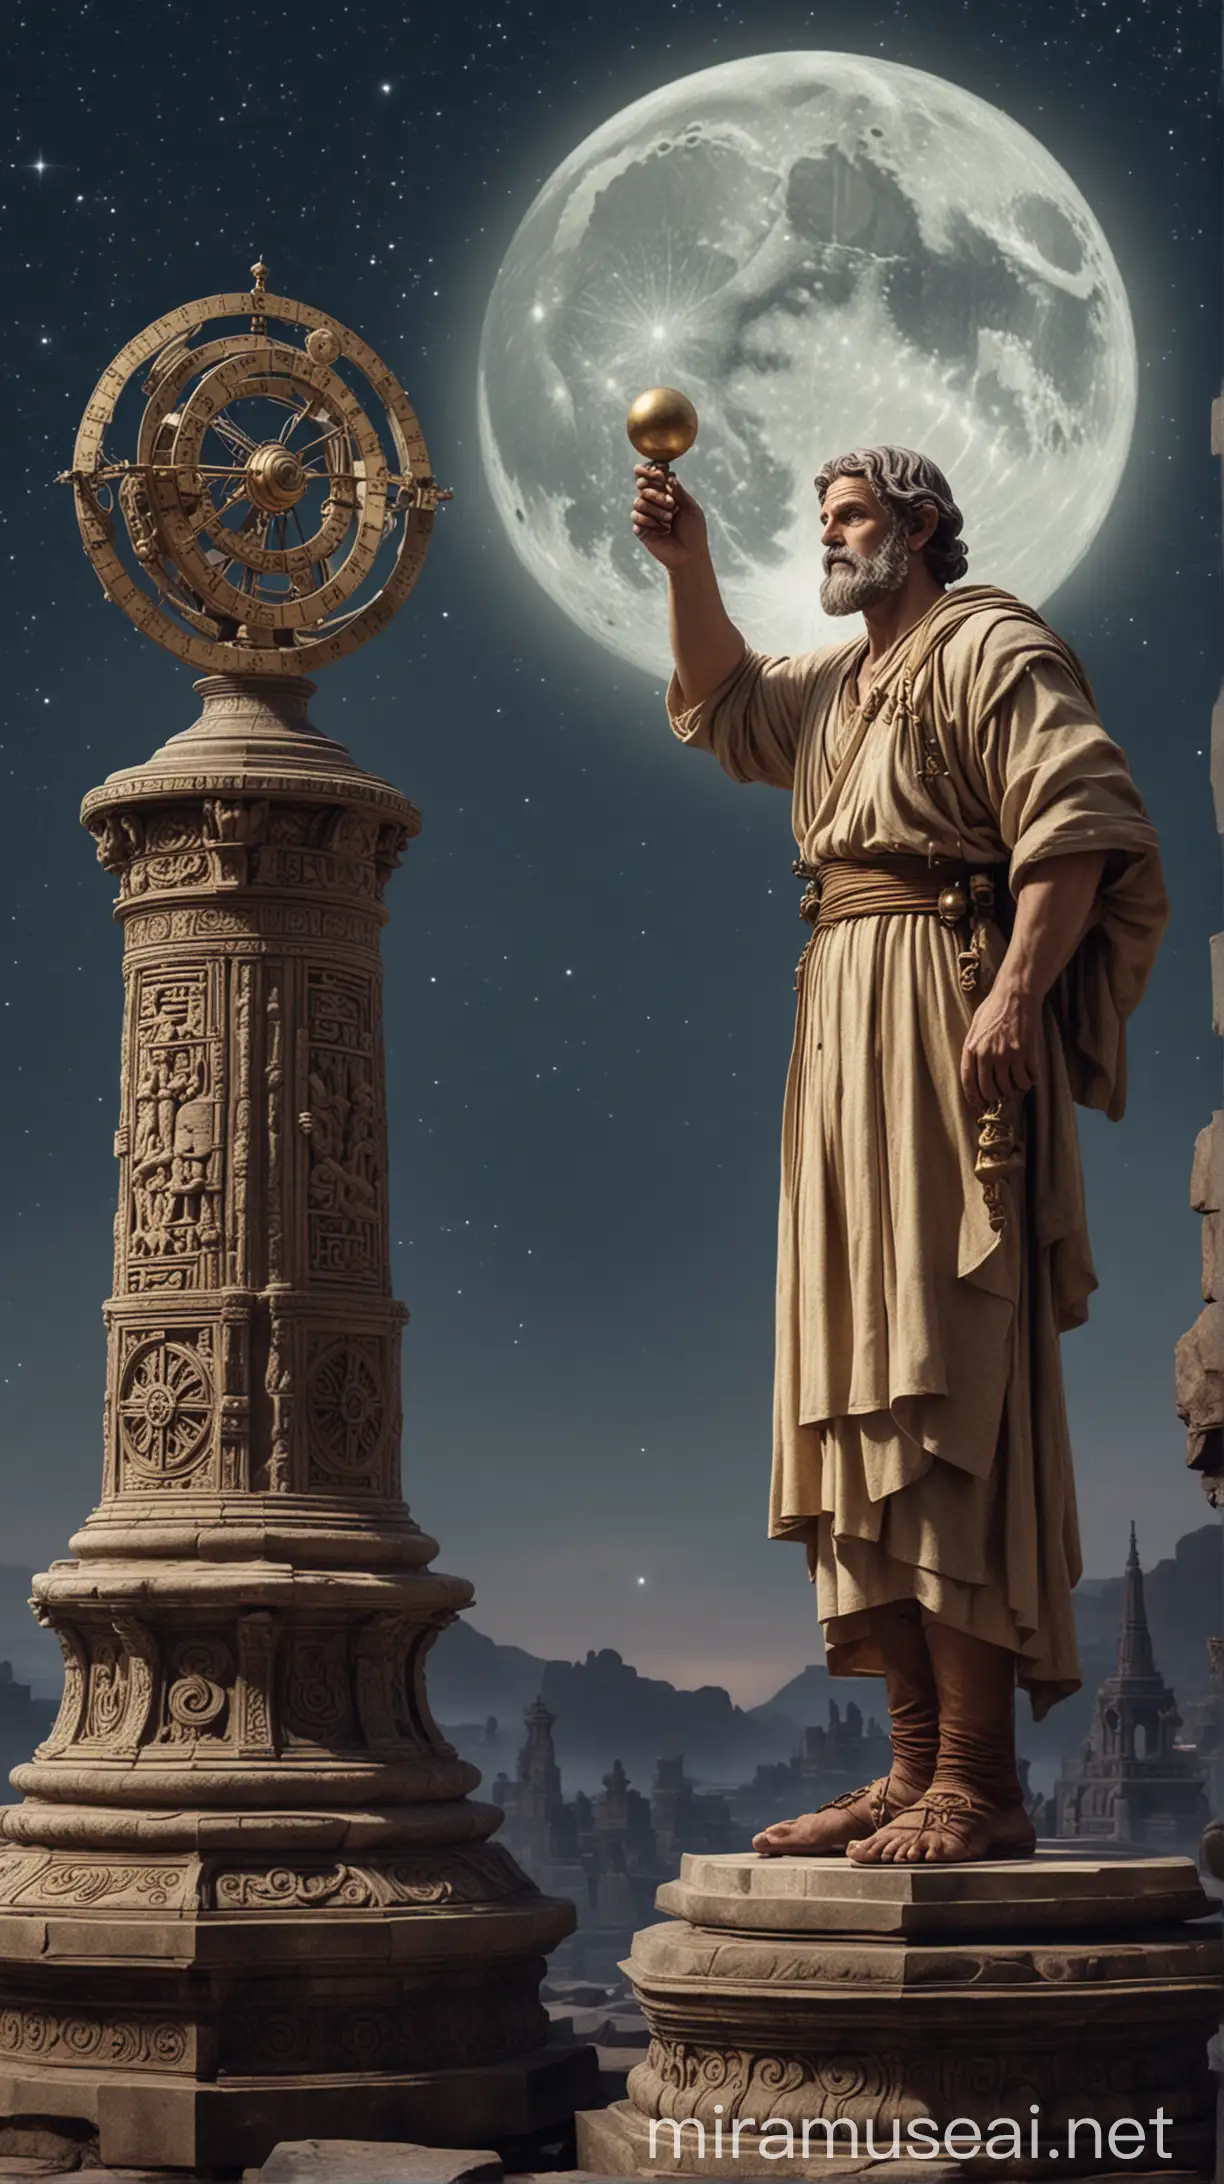 Ancient Astronomer Observing Night Sky with Astrolabe atop Stone Temple